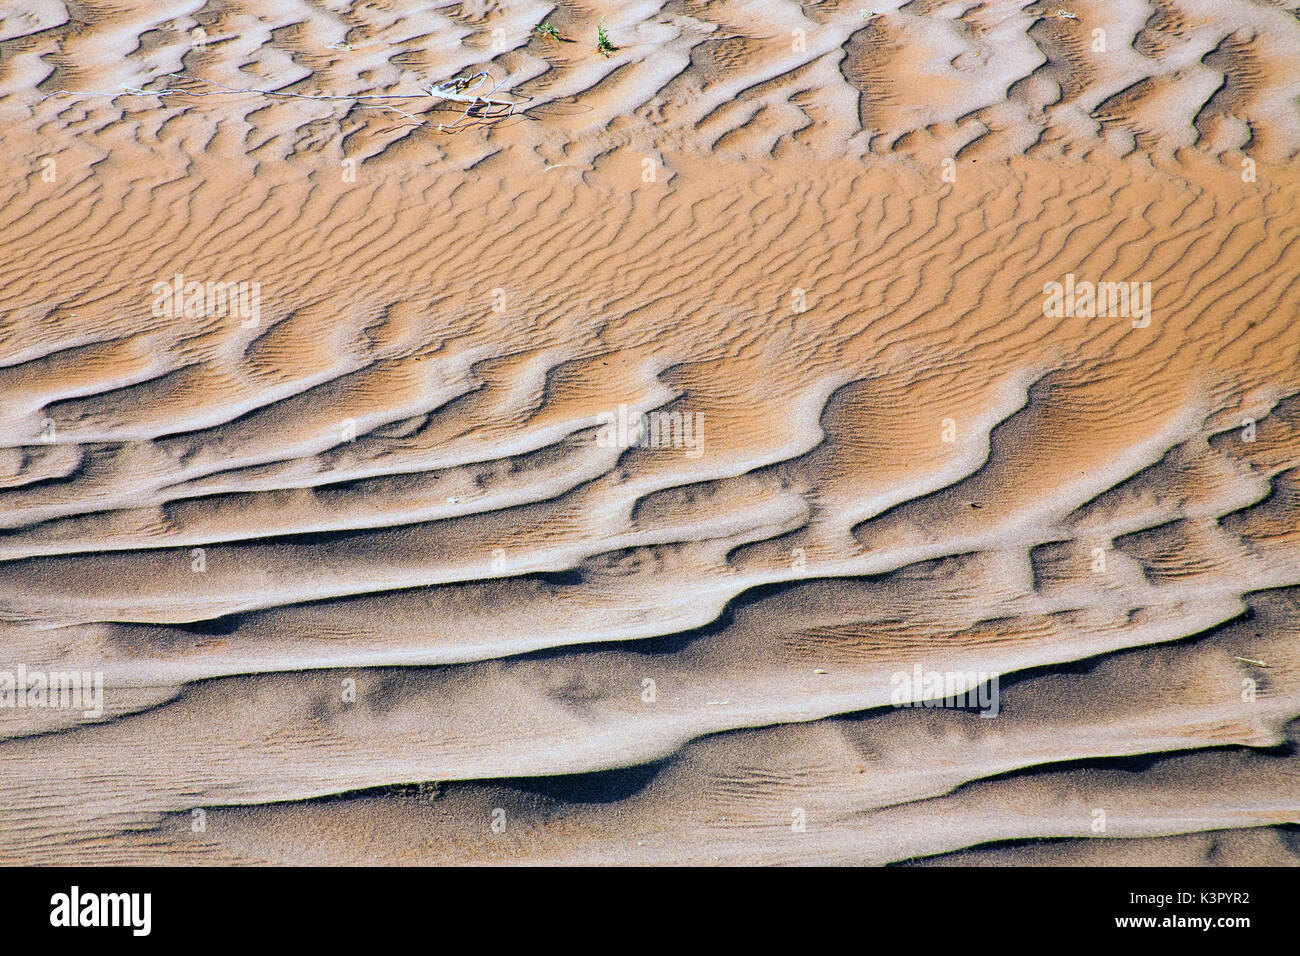 Wind and gravity are constantly redefining the shape of the dunes in Namib Desert, Namibia Africa Stock Photo